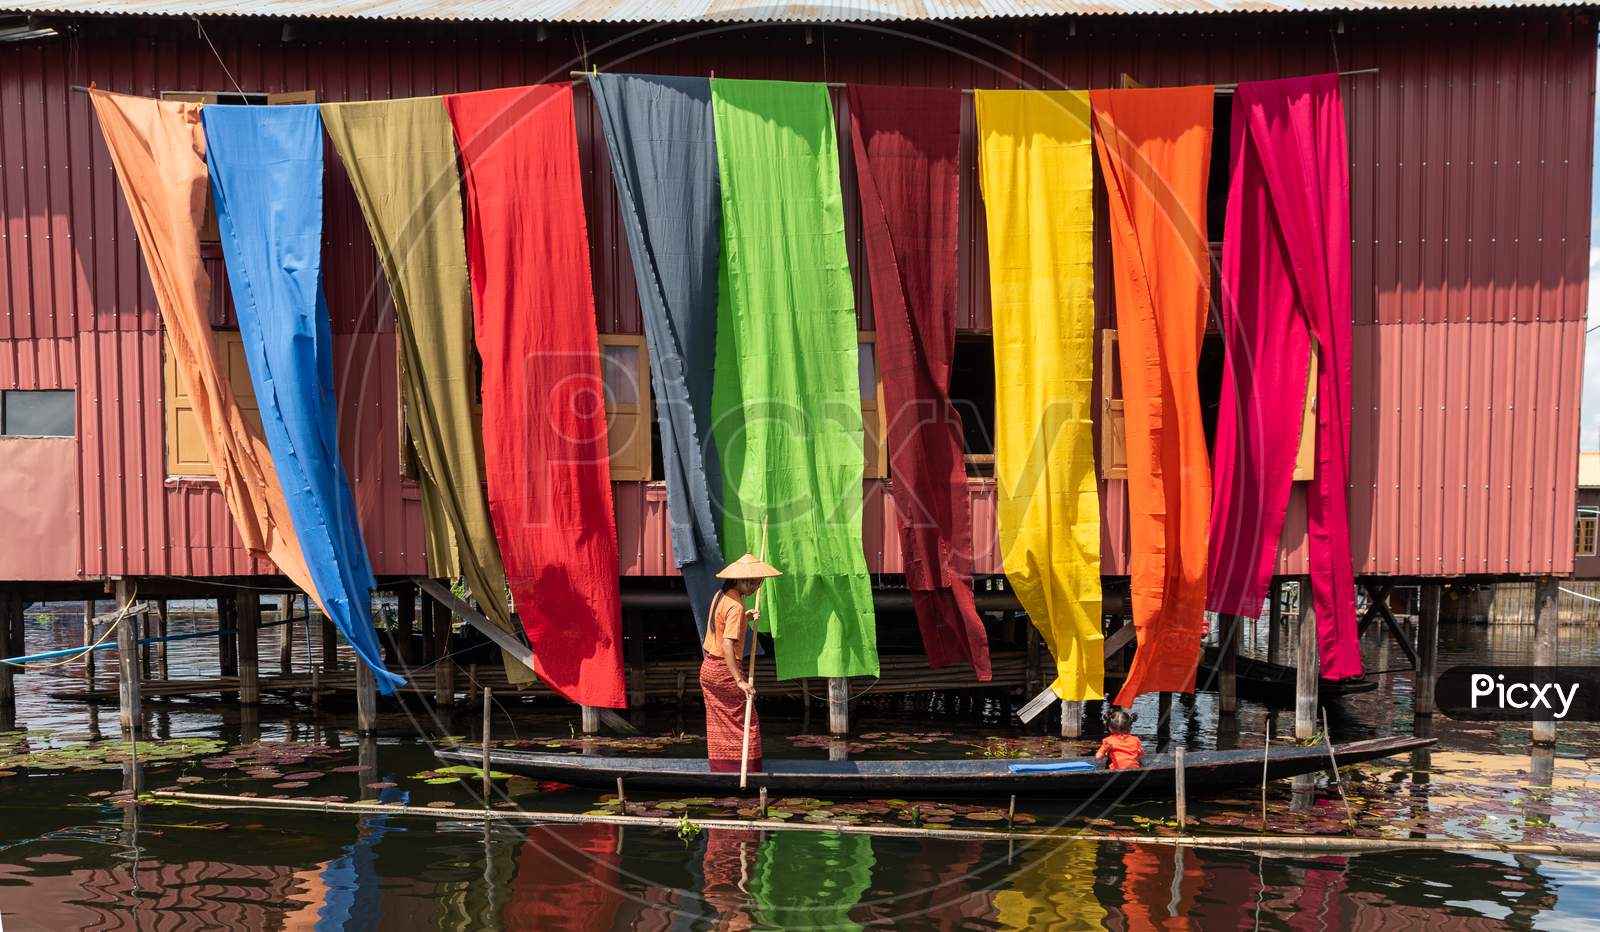 Handcrafted Colorful Lotus Fabrics Made From Lotus Fibers In Inle Lake, Shan State In Myanmar. These Inle Handcrafted Lotus Fabrics Are Made Using Natural Dyes And Dried Under Sunlight. This Process Controls Fabric Shrinkage Before Sending The Fabrics Out As Finished Products In The Market.